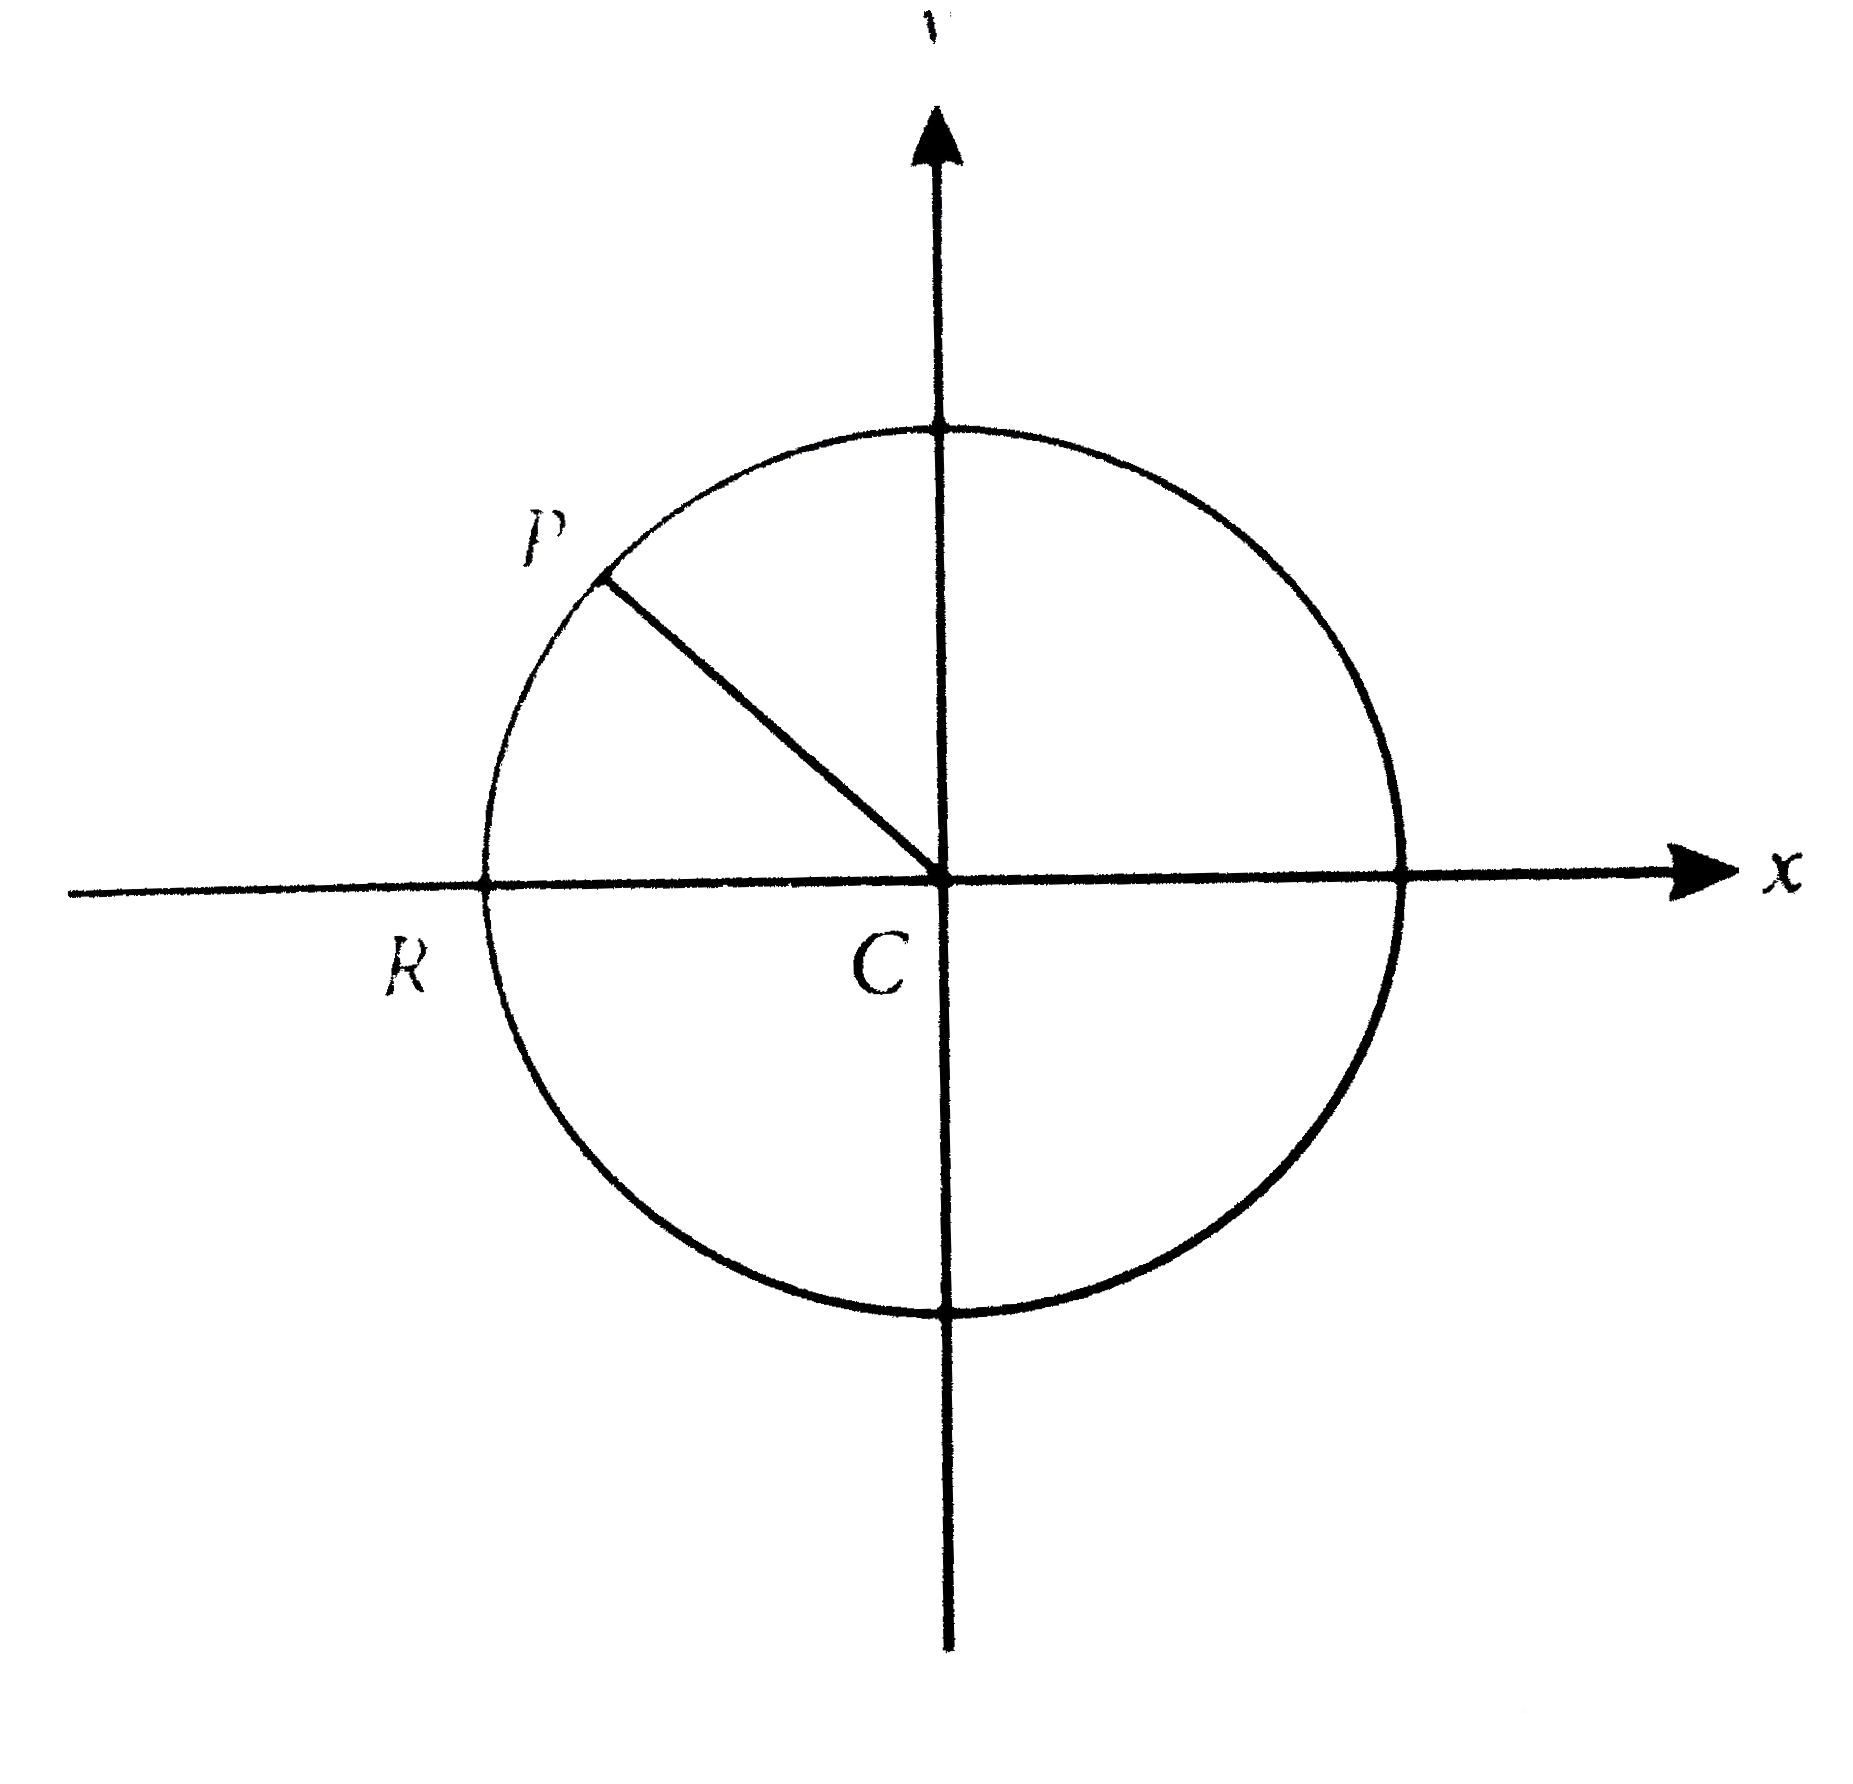 In the xy-plane above, the circle with center C contains the point P with coordinates (-sqrt(2), sqrt(2)). If angle PCR has a measure of (pi)/(x) radians, what ist he value of x?